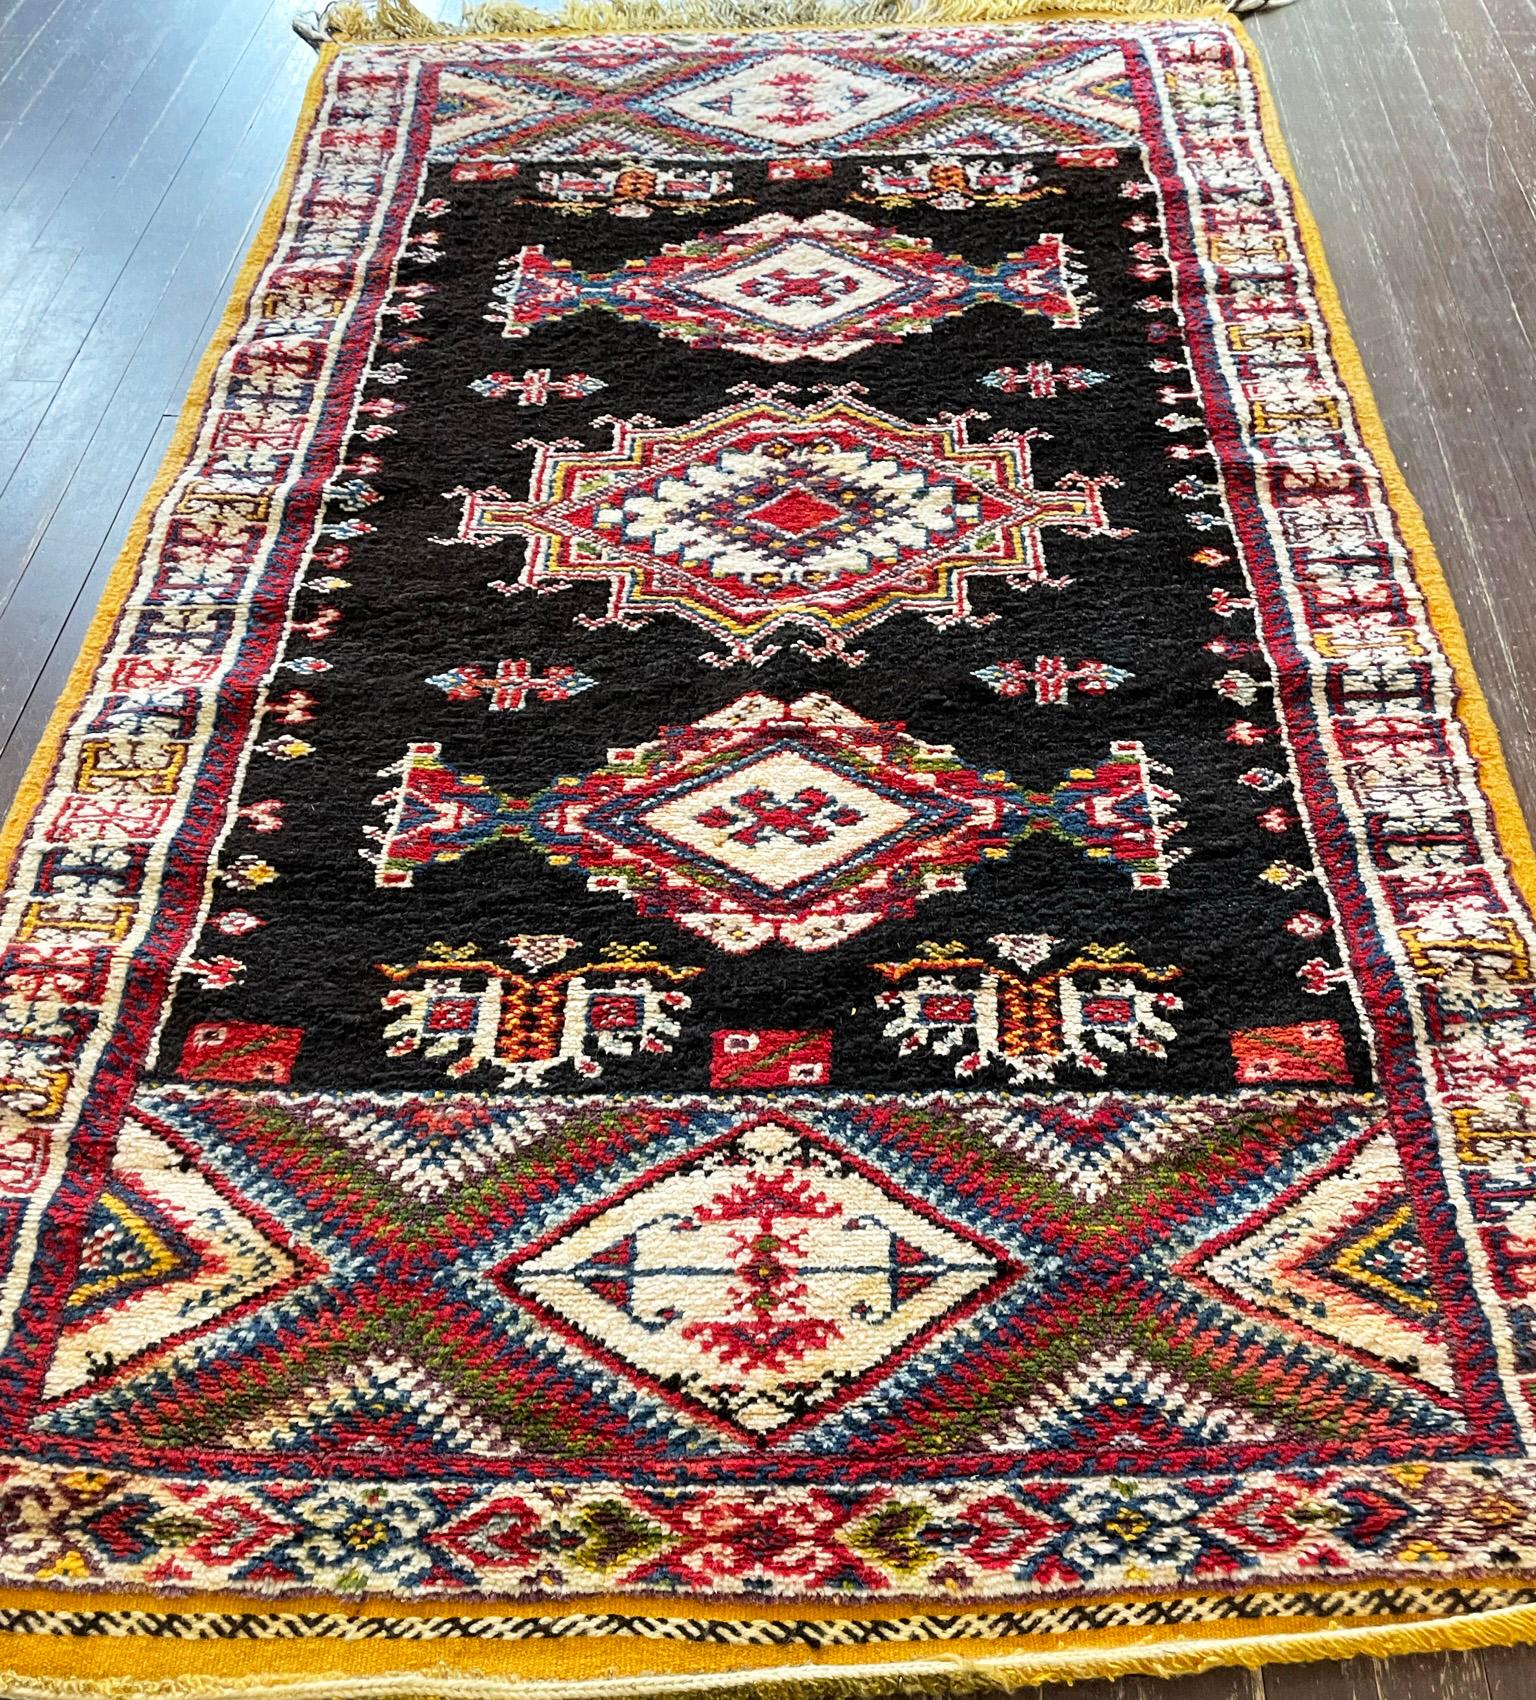 Vintage handmade Tribal North African Moroccan rug, most desirable and unique 3'9